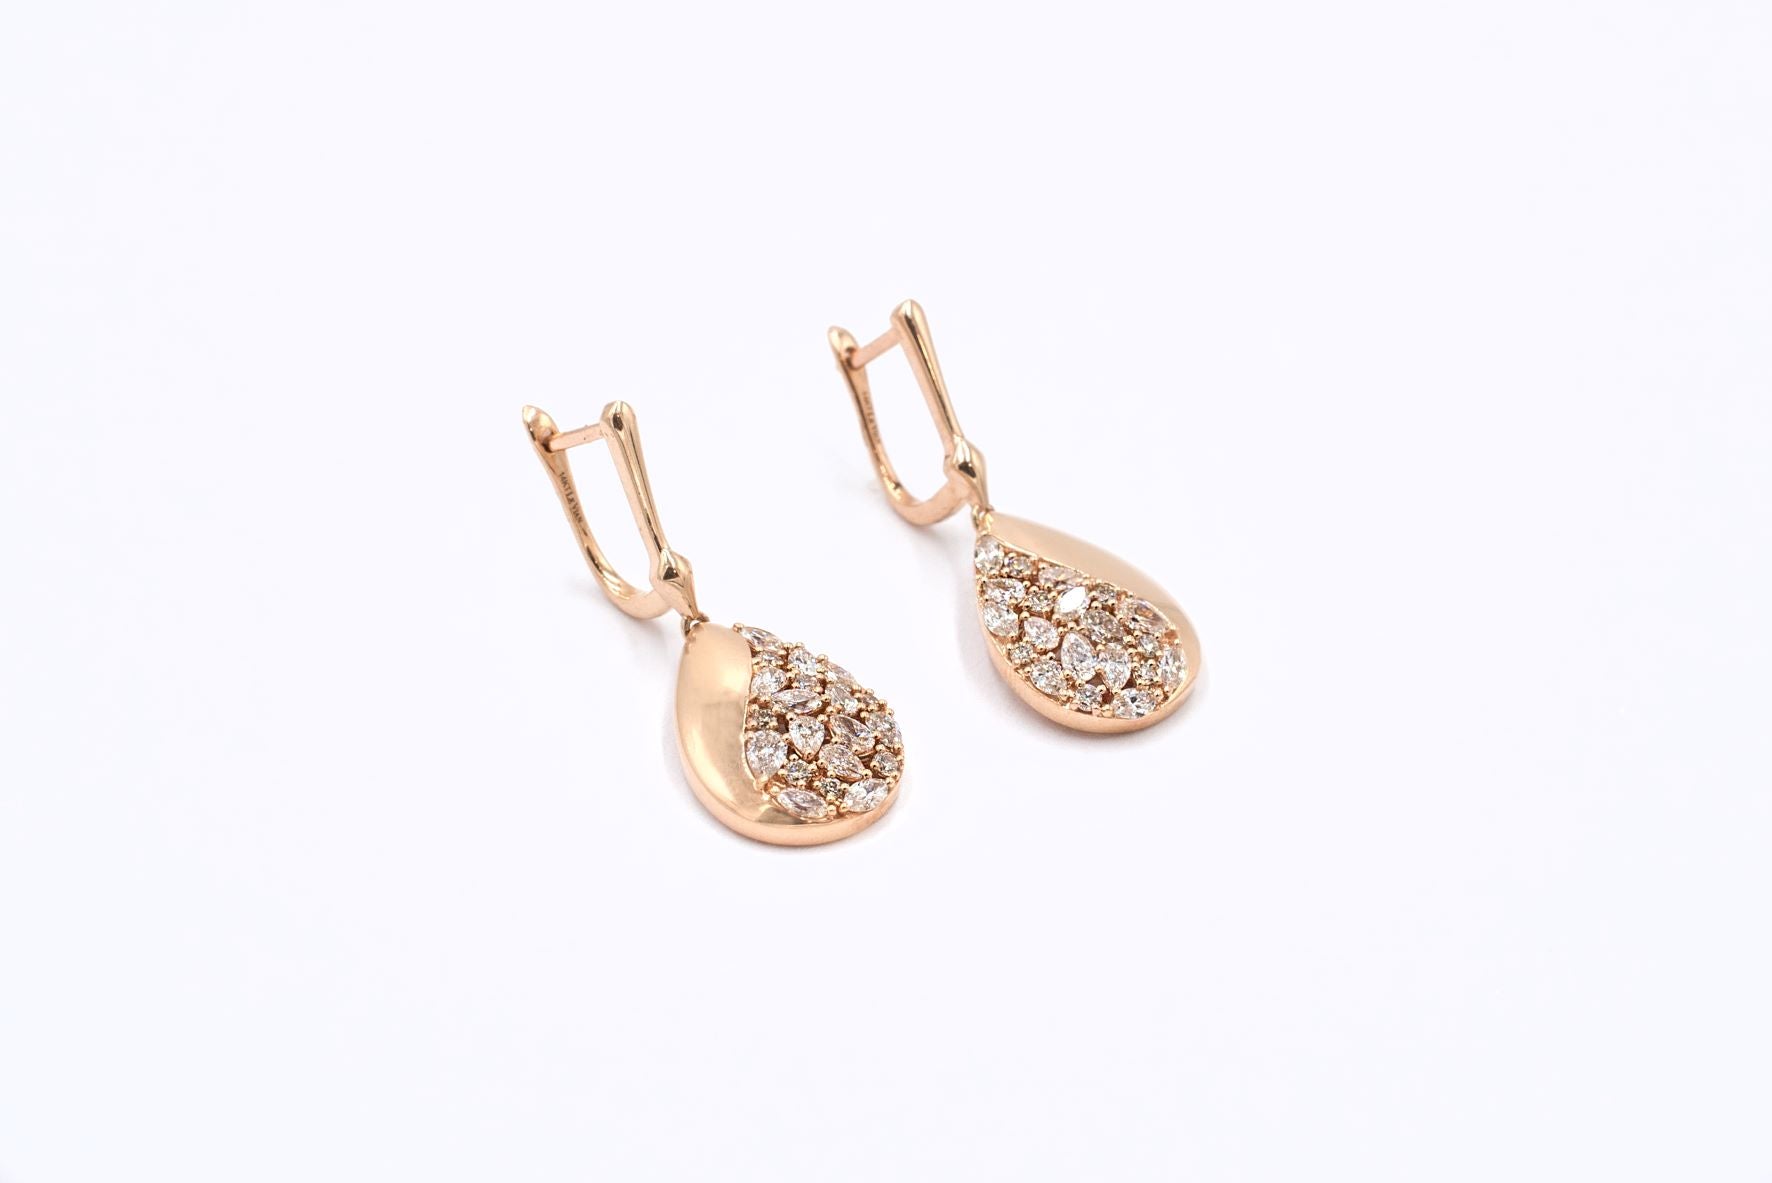 LeVian 1 1/2 ctw Vintage-Style Strawberry Gold Earrings